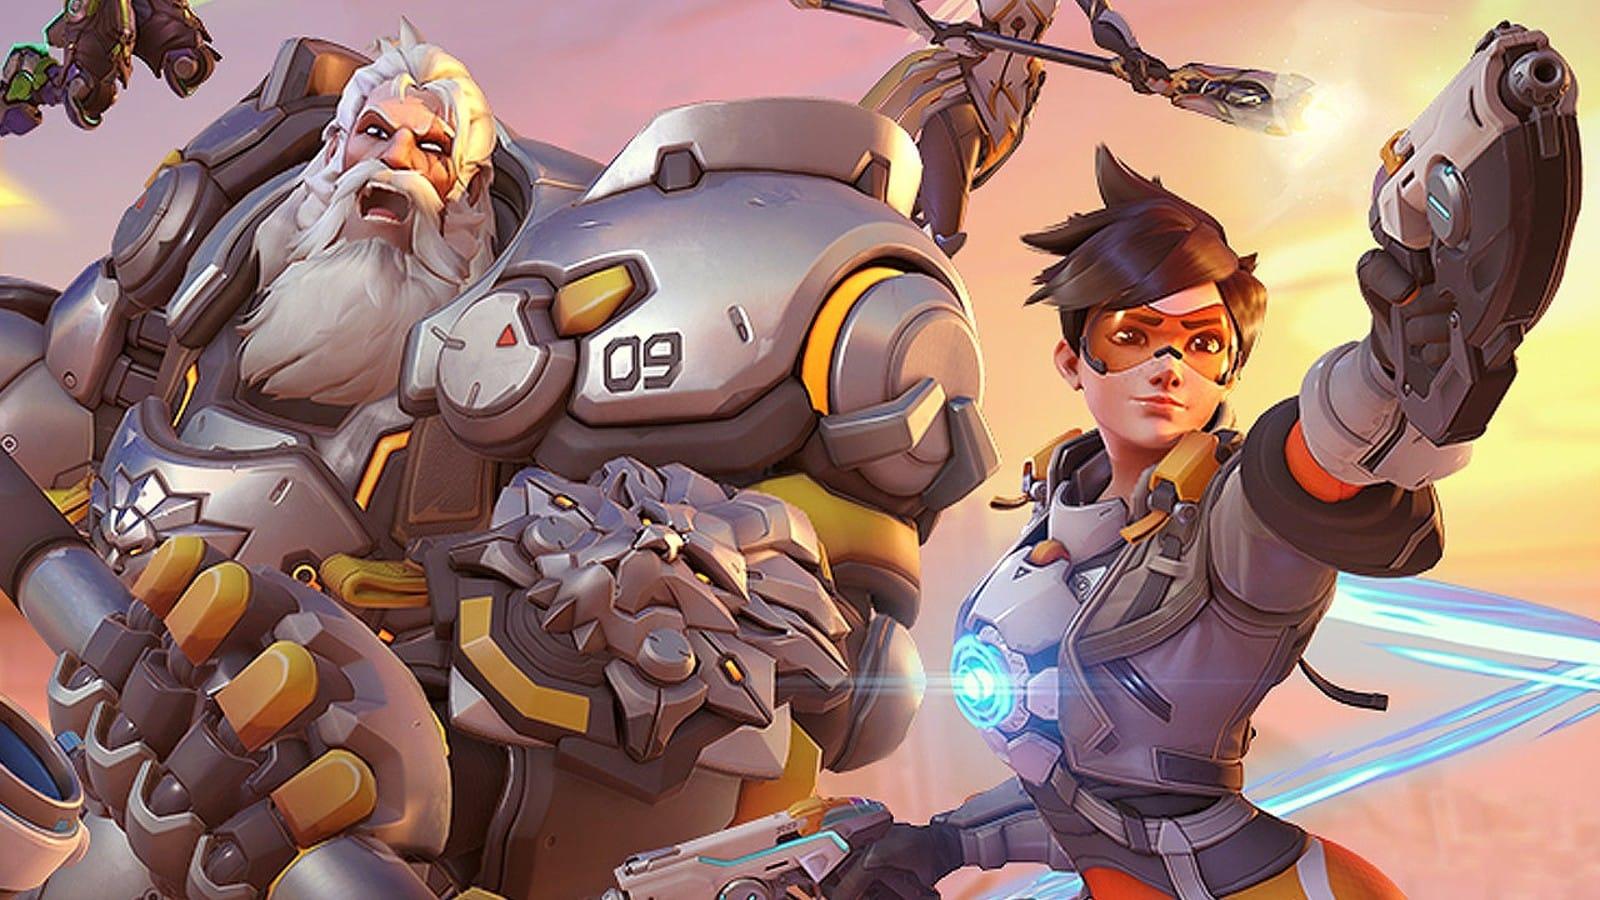 Overwatch Player Count - How Many People Are Playing Now?